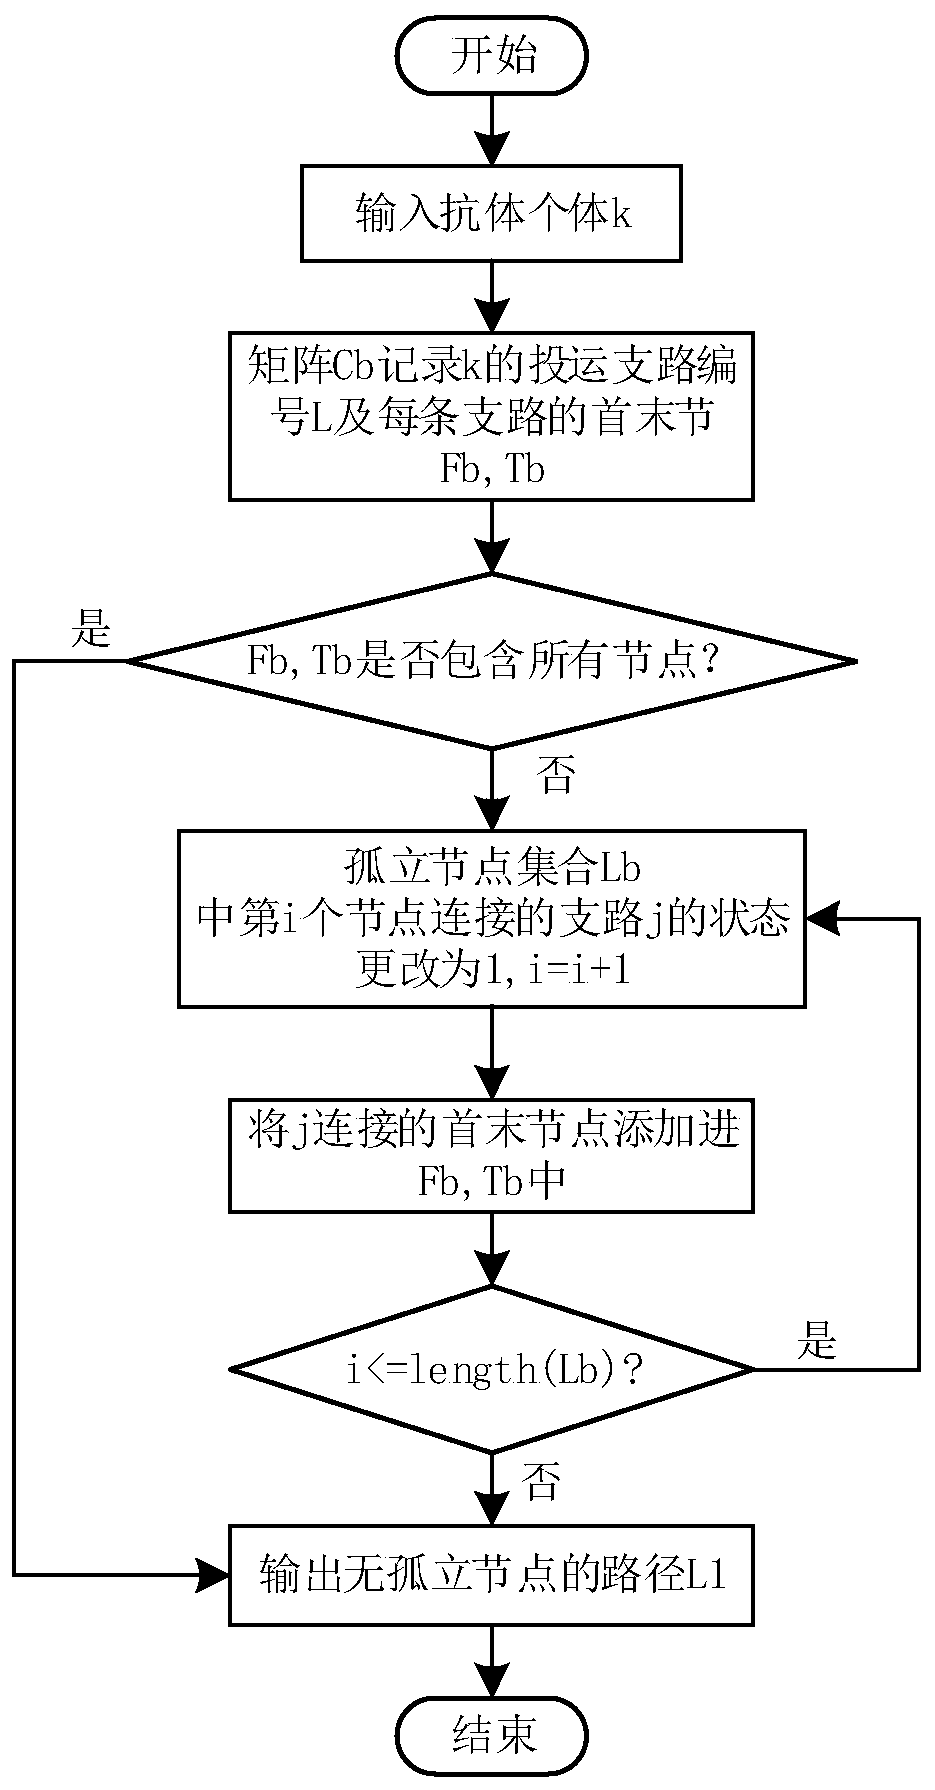 Distribution network path optimization method based on improved condensation hierarchical clustering method